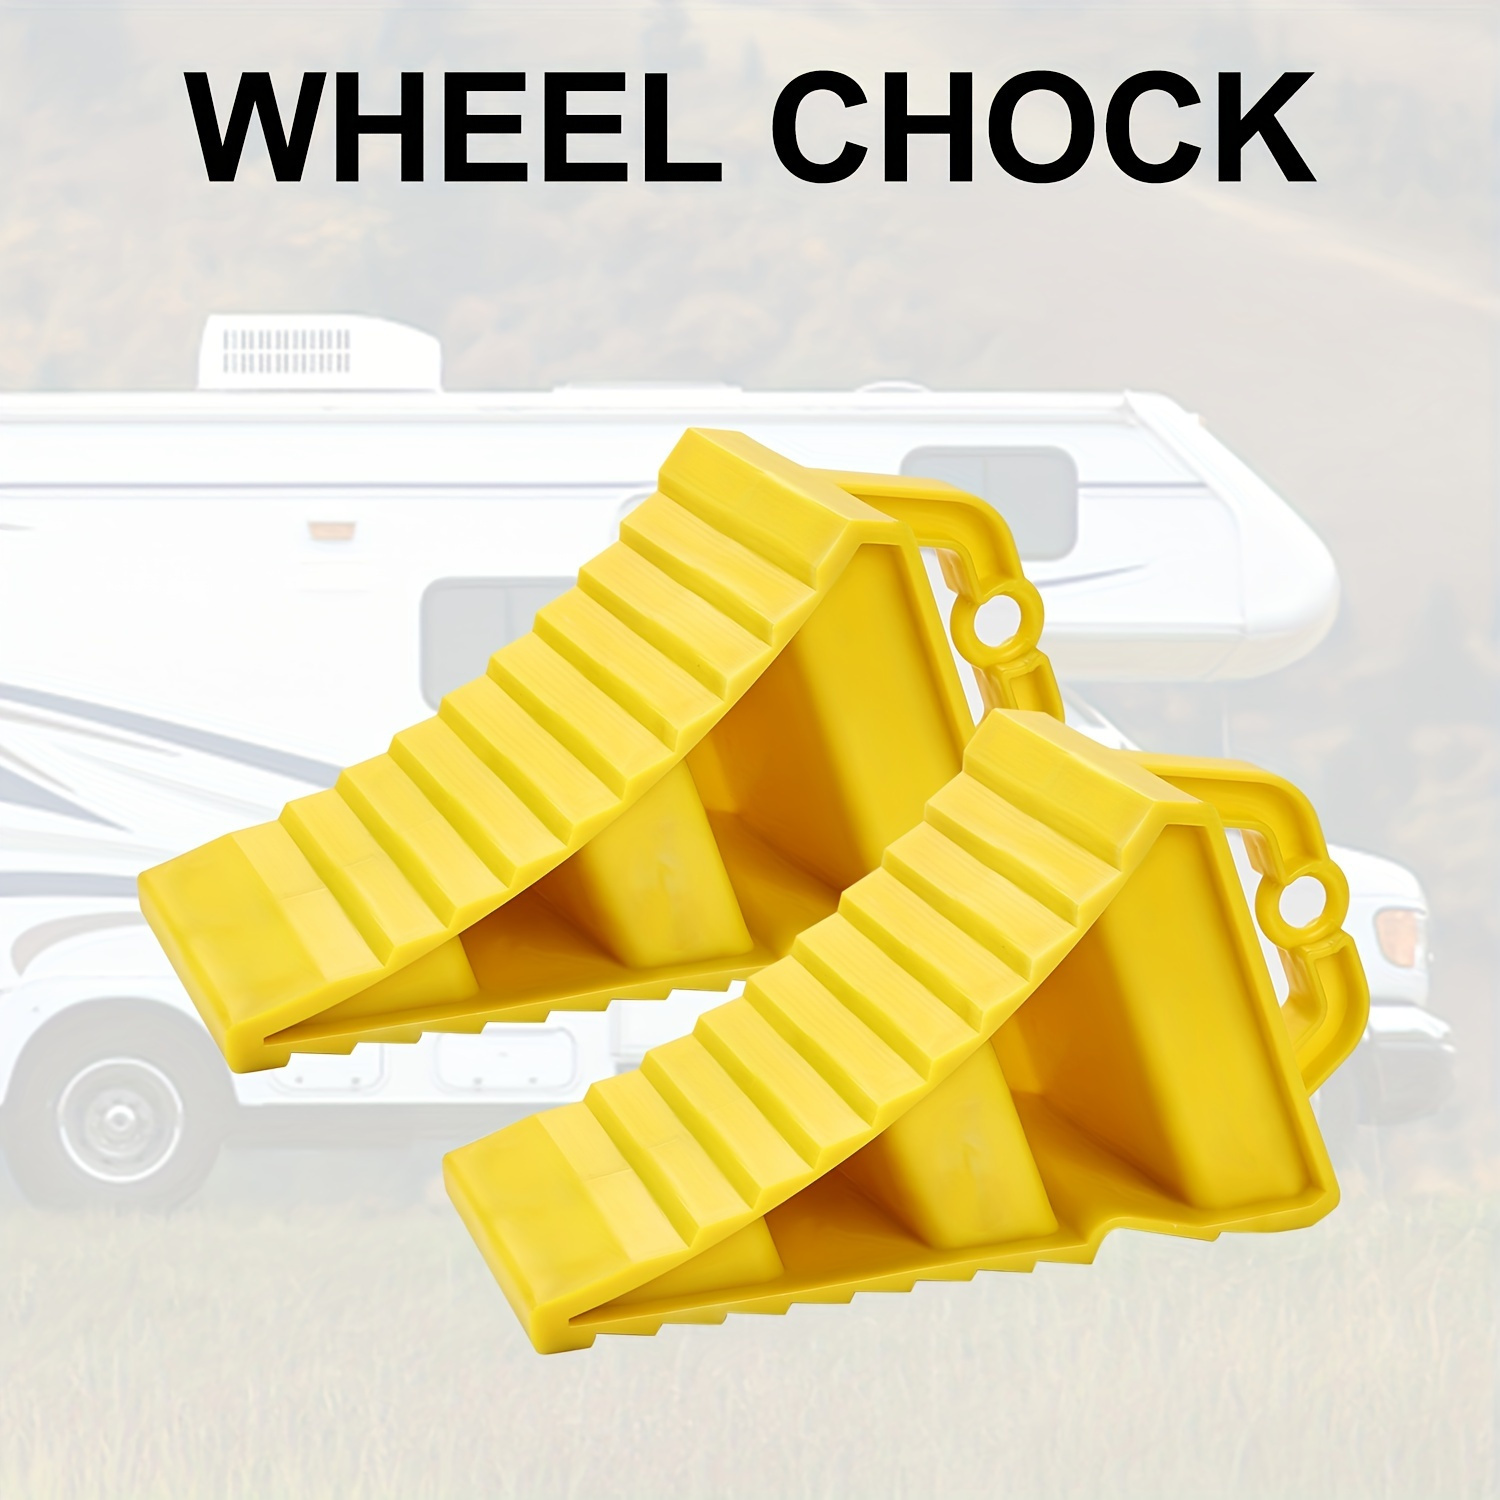 

2pcs Secure Your Vehicle Car Ramp 1pc Wheel Chocks - Anti-slip Tire Block With Handle For Car, Rv, And Trailer